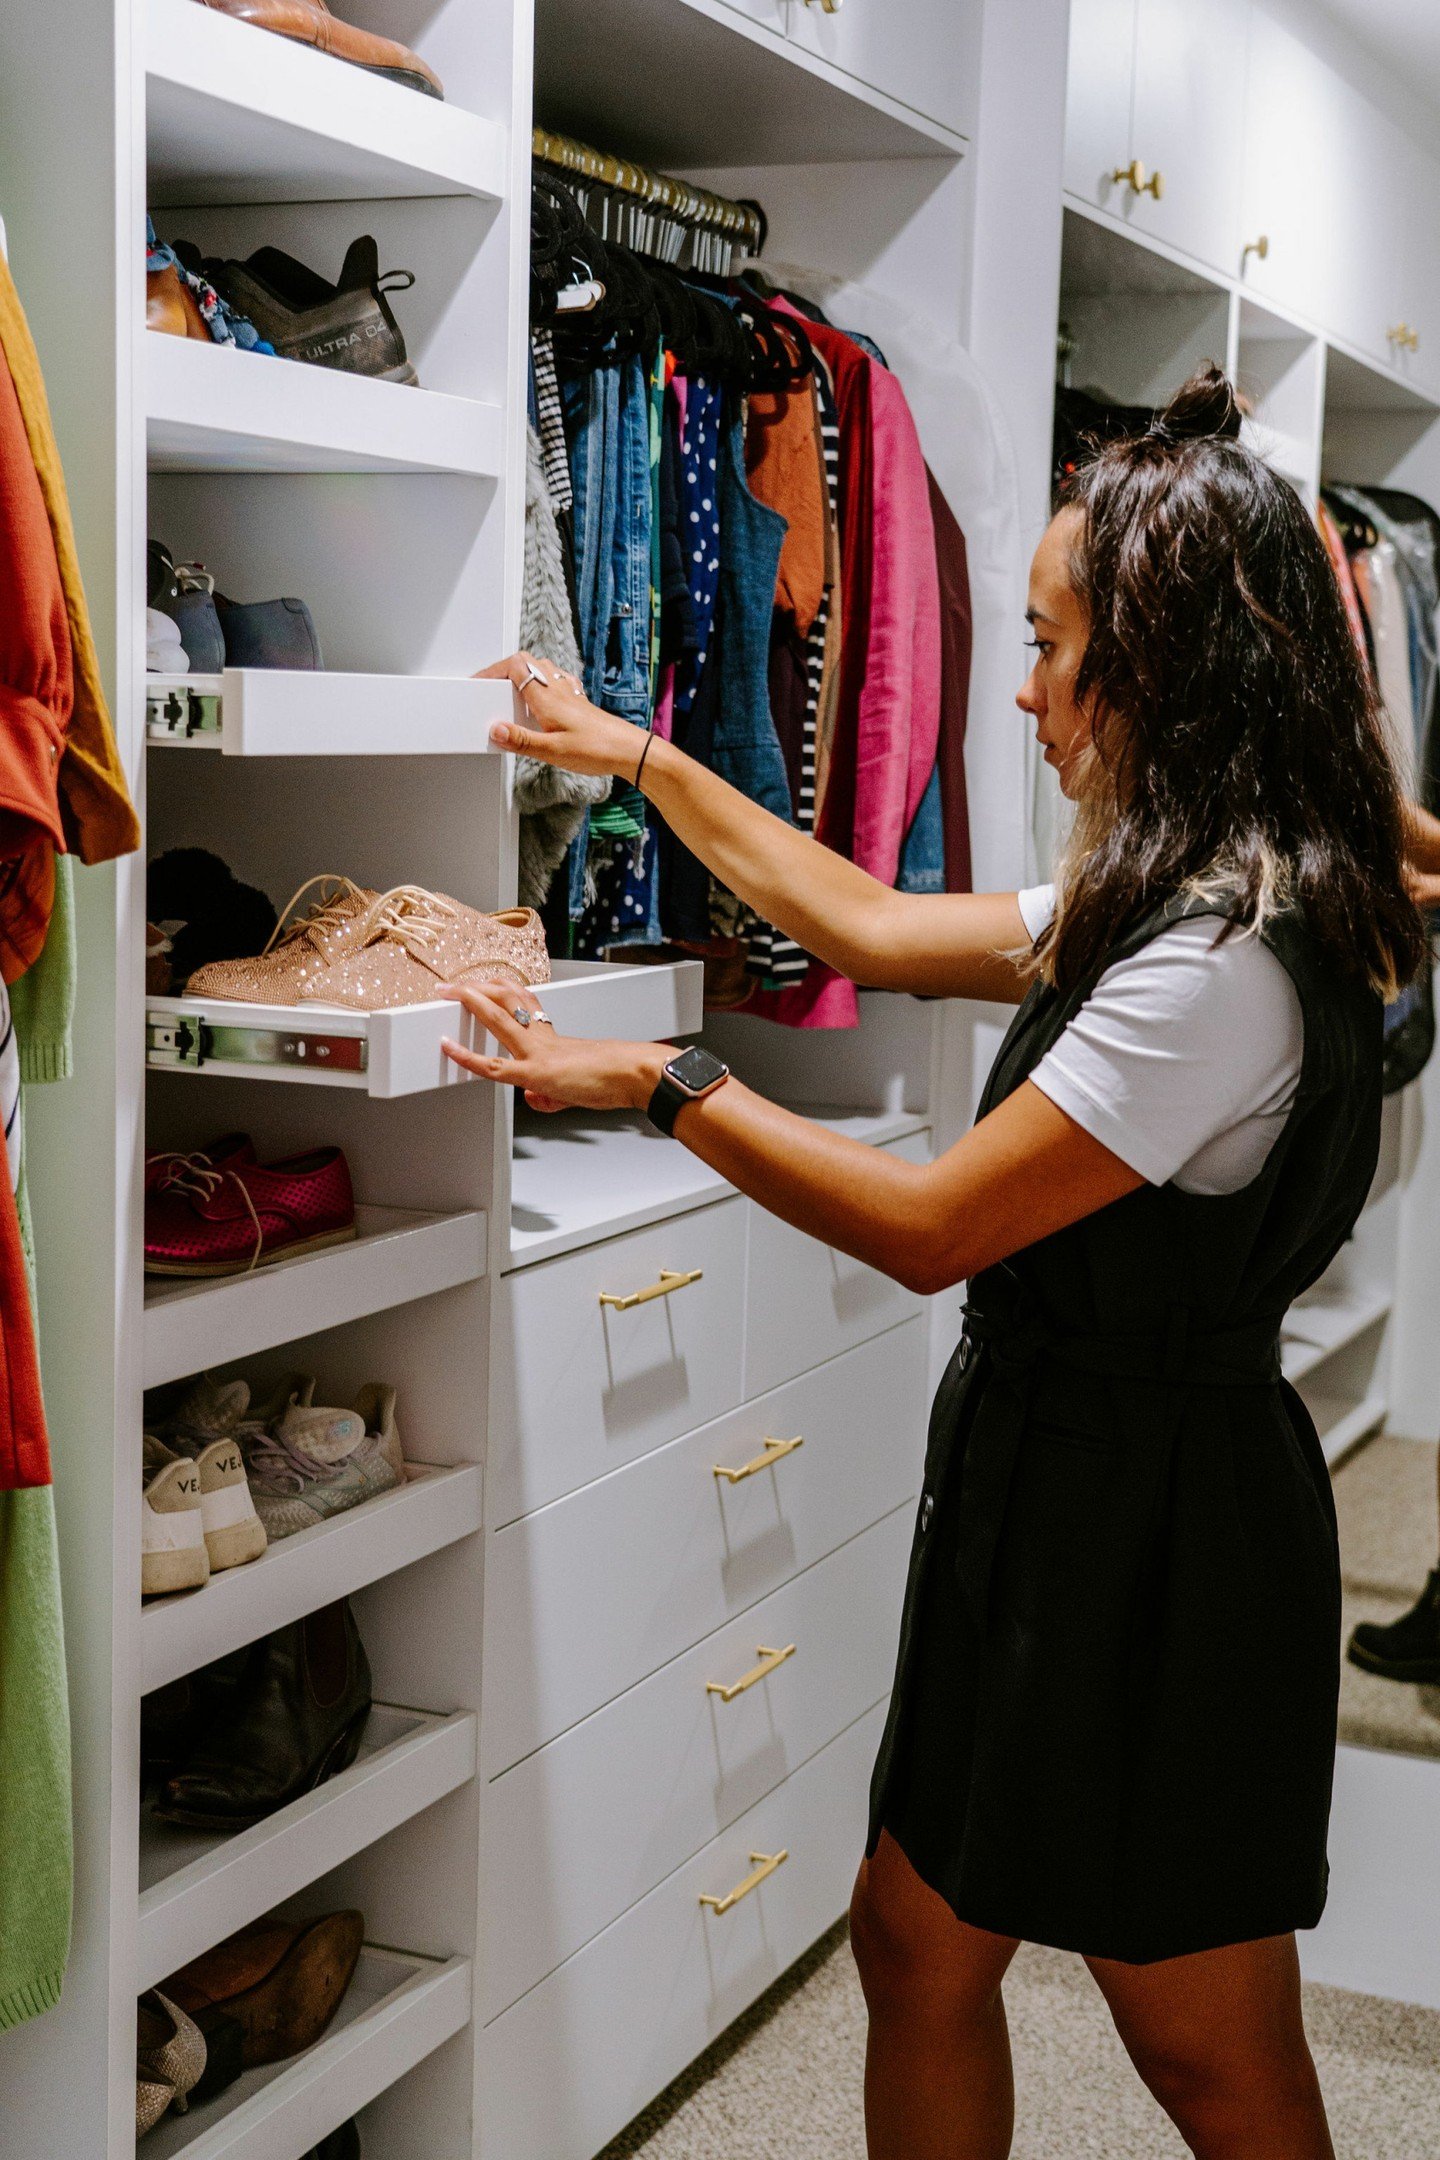 ✨ Maximising your walk-in wardrobe space! ✨ Here are 3 tips to transform your walk in robe into a stylish and functional haven:

1️⃣ Vertical Space Magic: Use as much of the vertical space as possible, I would usually go as high as 2600mm for the rob